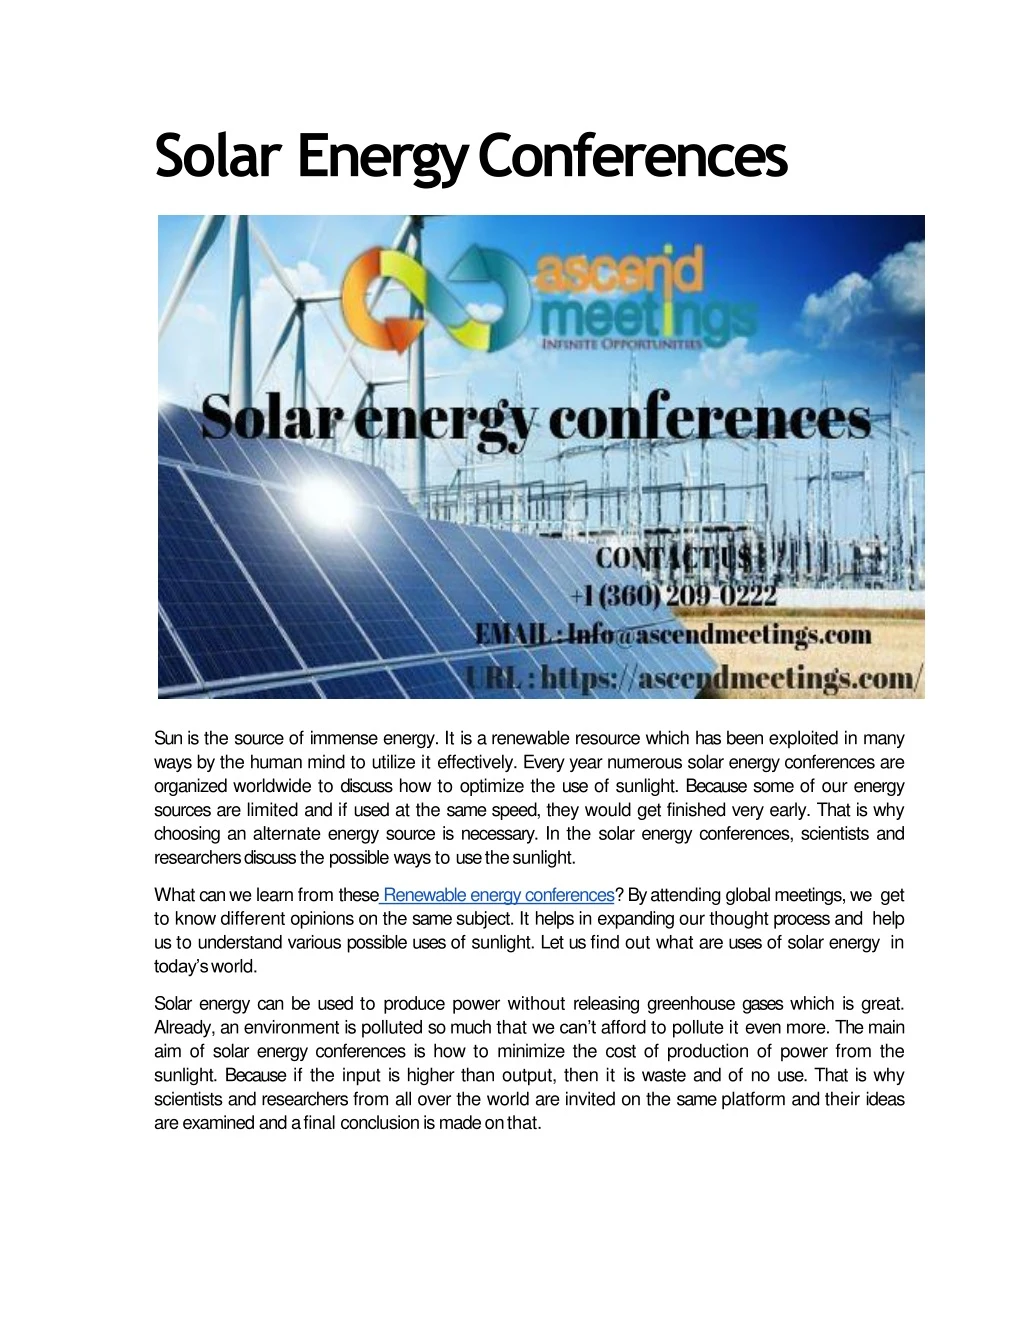 PPT Solar Energy Conferences PowerPoint Presentation, free download